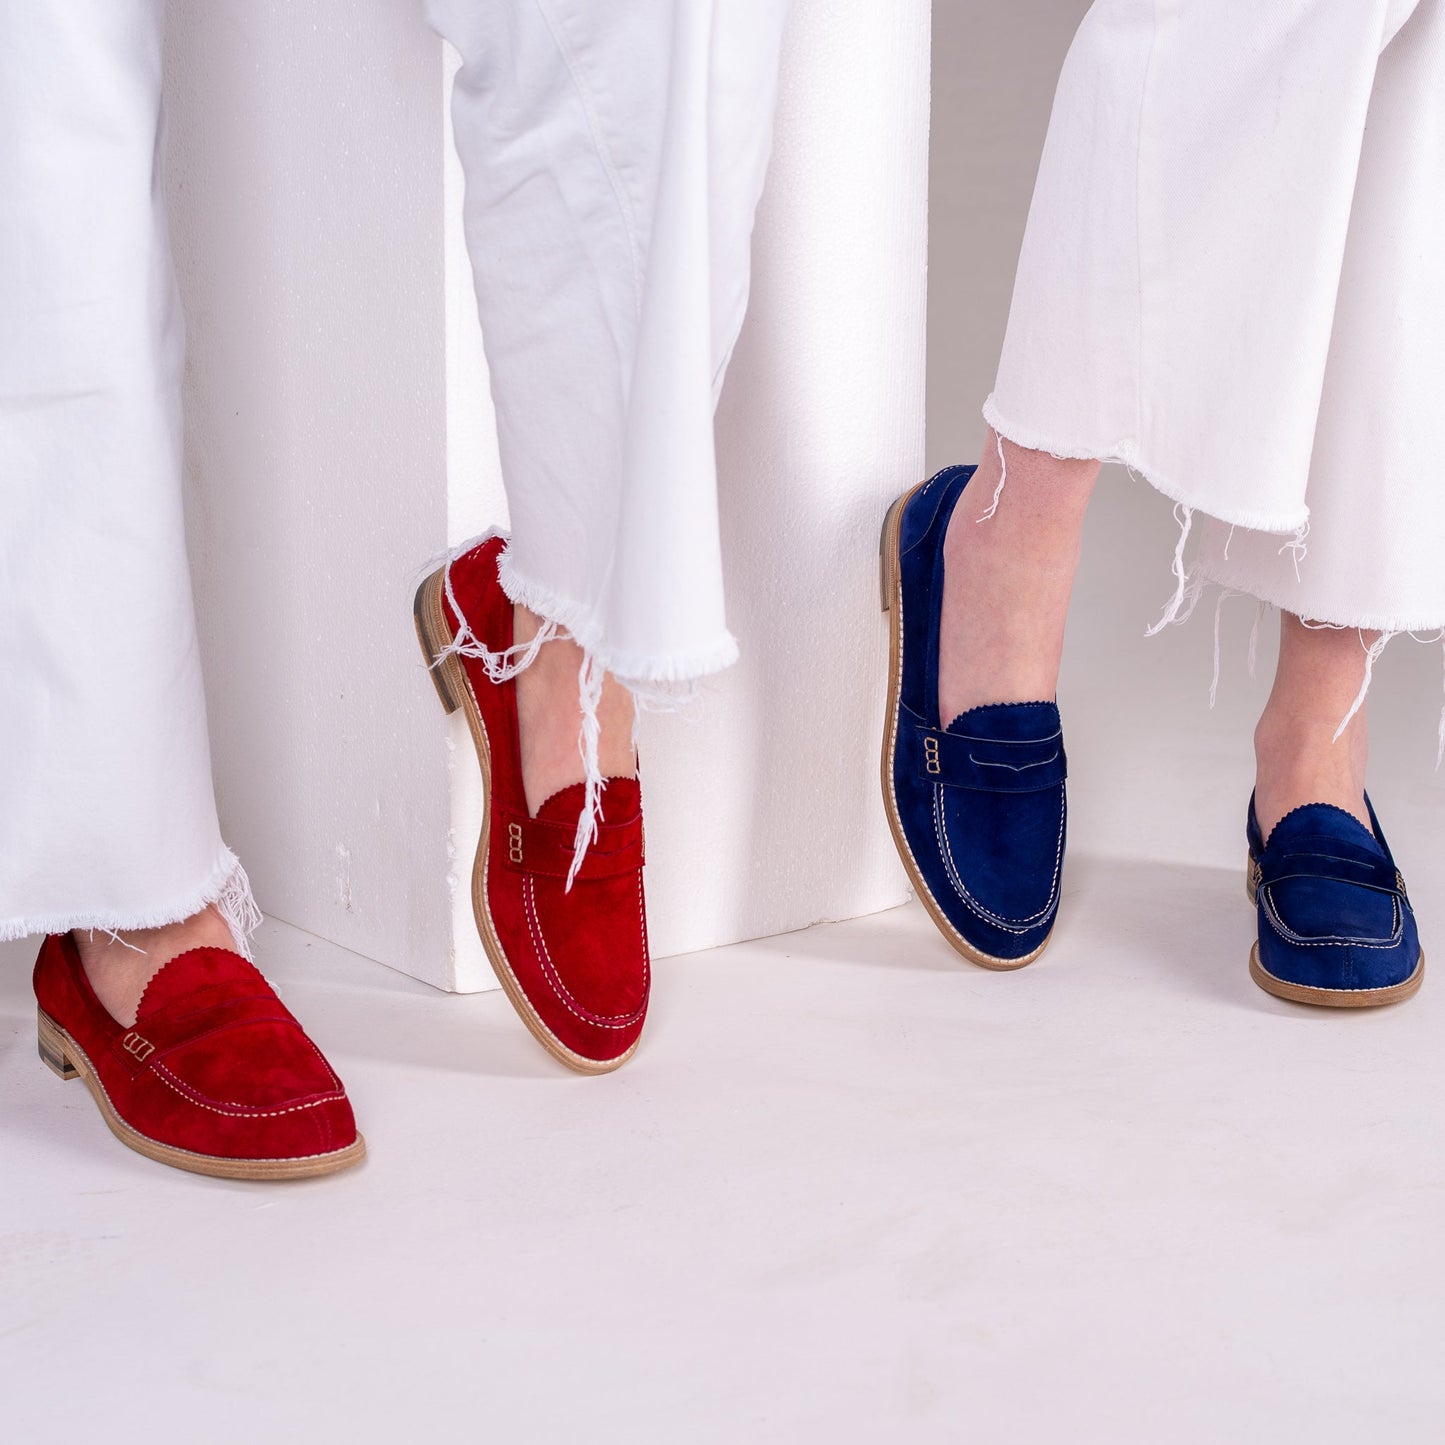 Loafer in soft red suede